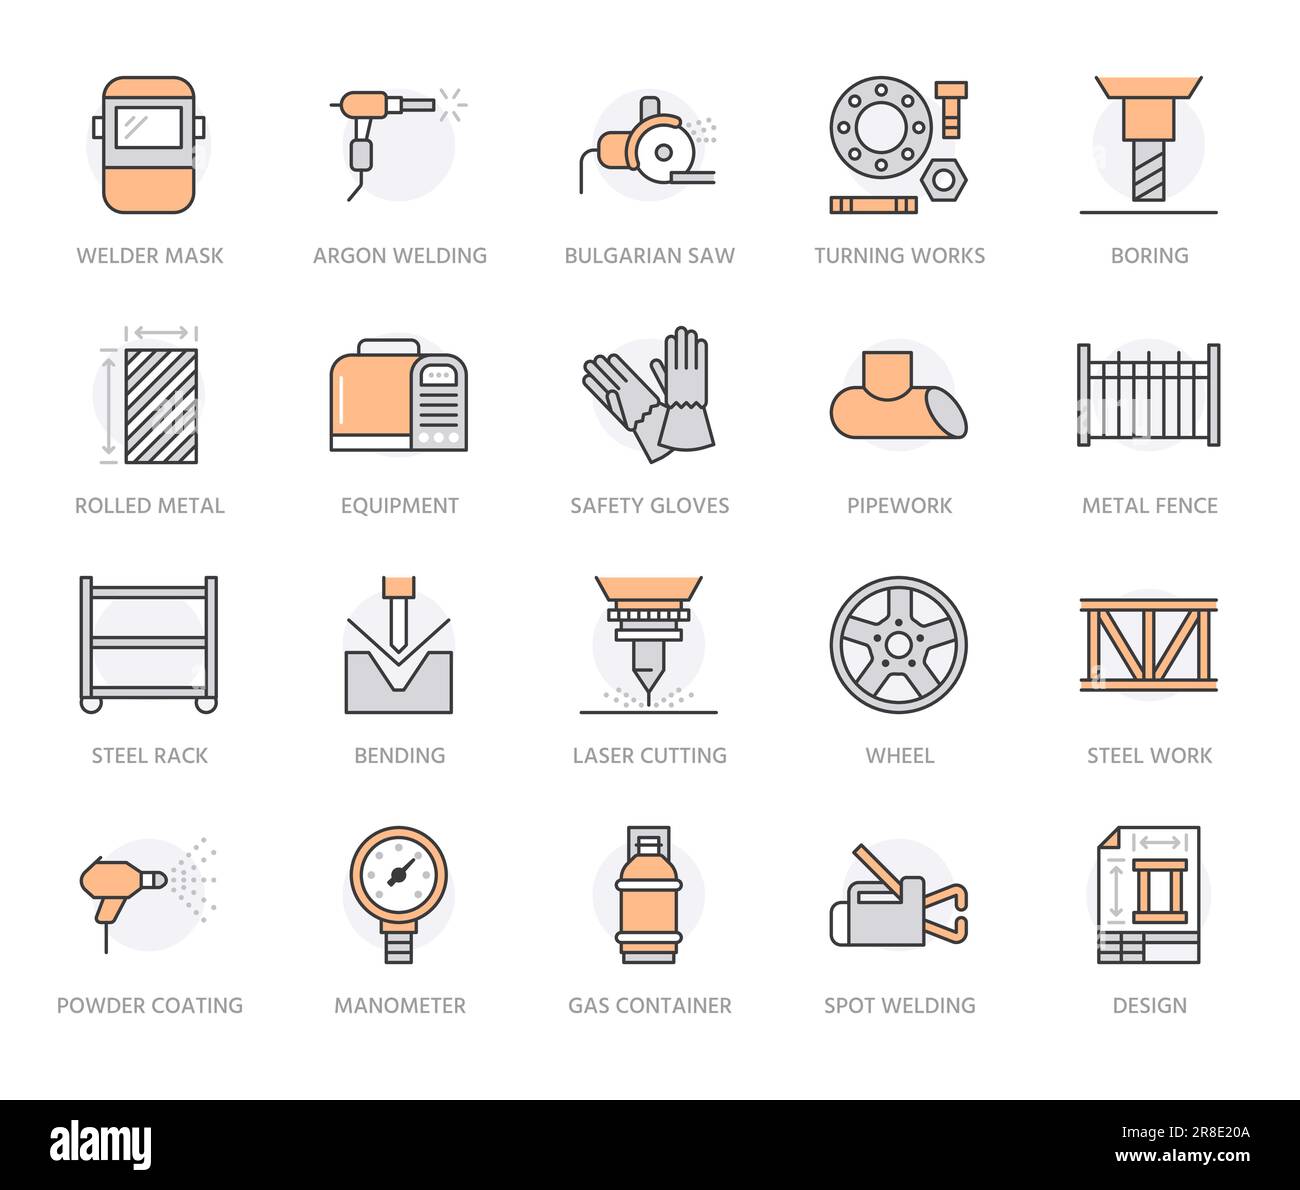 Welding services flat line icons. Rolled metal products, steelwork, stainless steel laser cutting, turning works, safety equipment. Industry thin Stock Vector